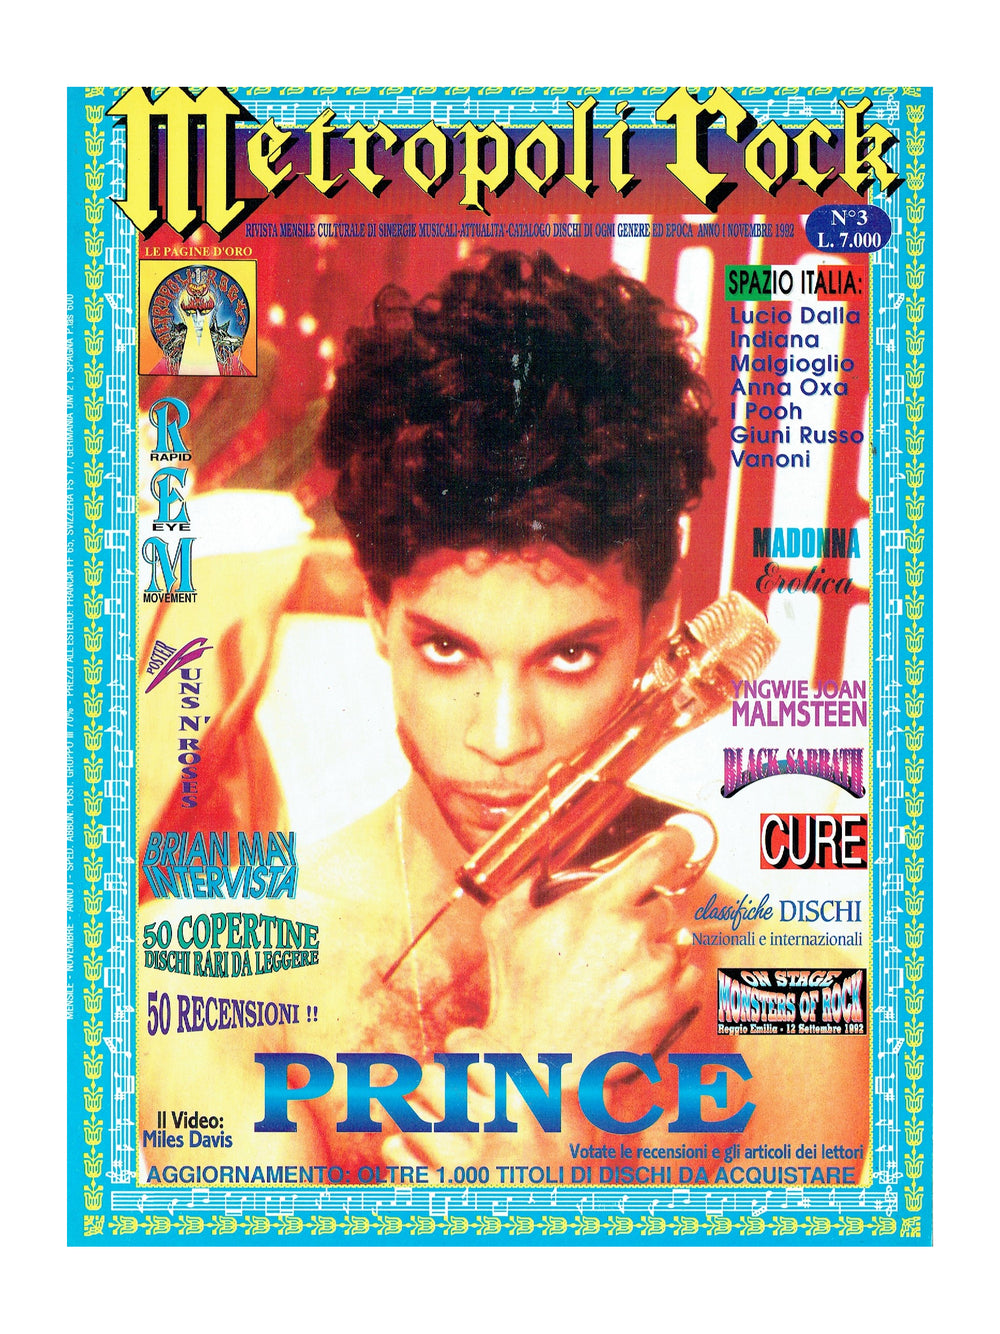 Prince – Melody Maker Publication 16 Pages 1978 - 1989 Period